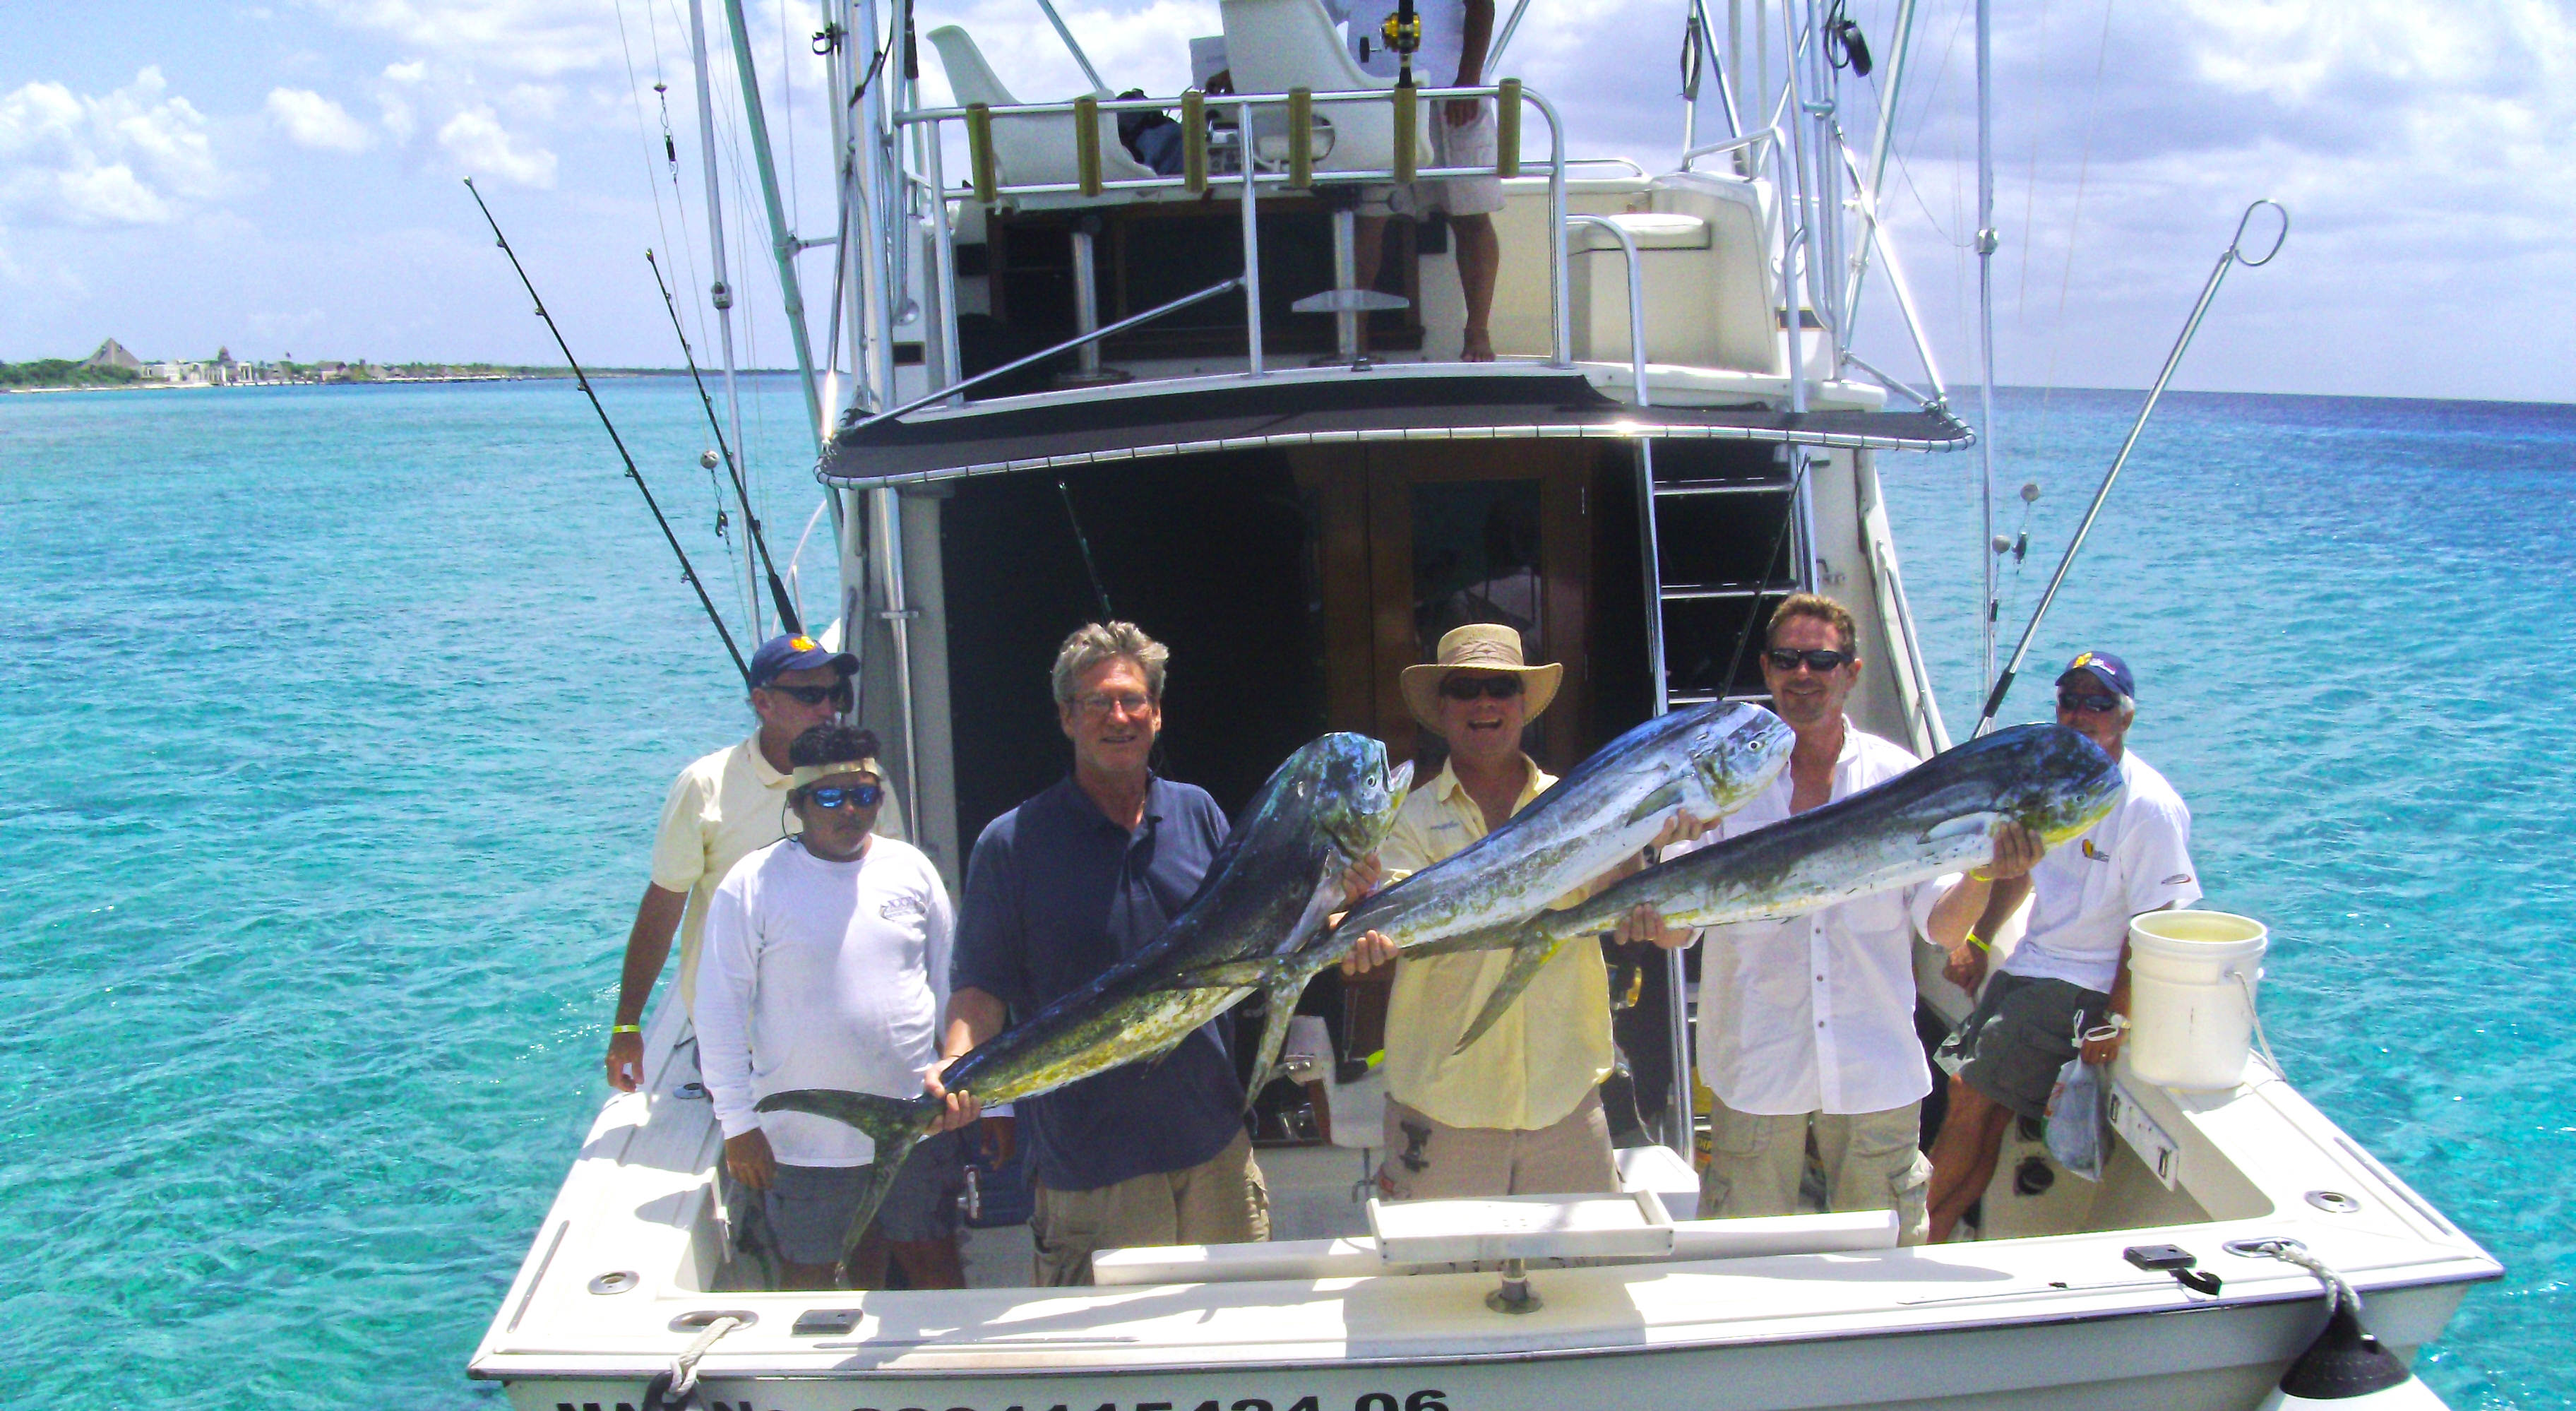 deep sea fishing cozumel for the best cozumel deep sea fishing tour in cozumel fishing tour to go fishing in cozumel fishing charter boat to fish in cozumel mexico